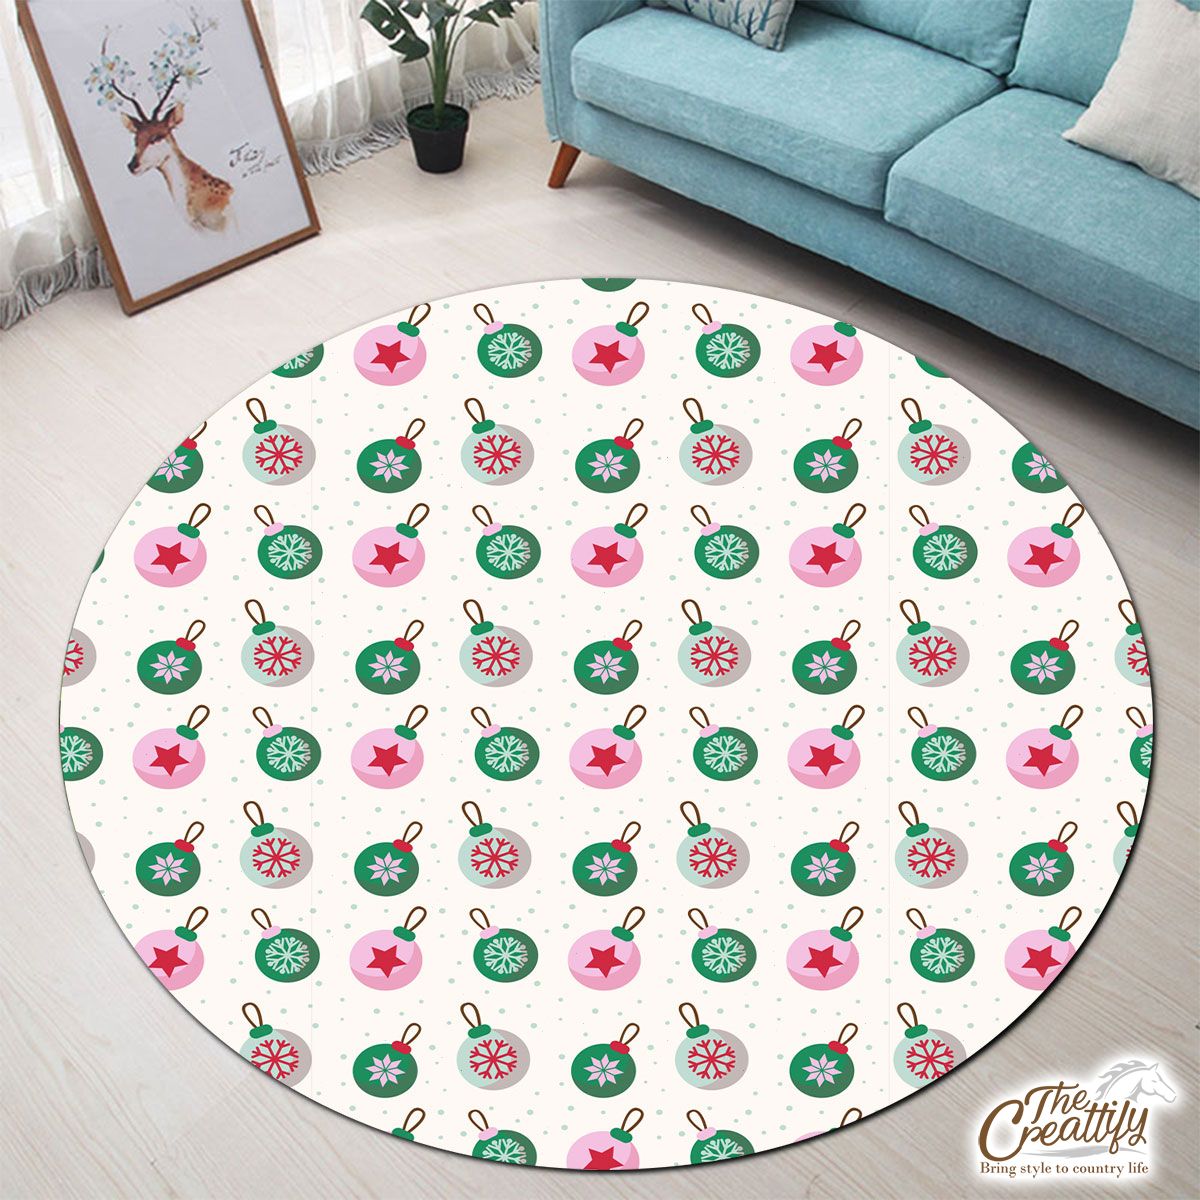 Green Pink And White Christmas Ball Pattern Round Carpet